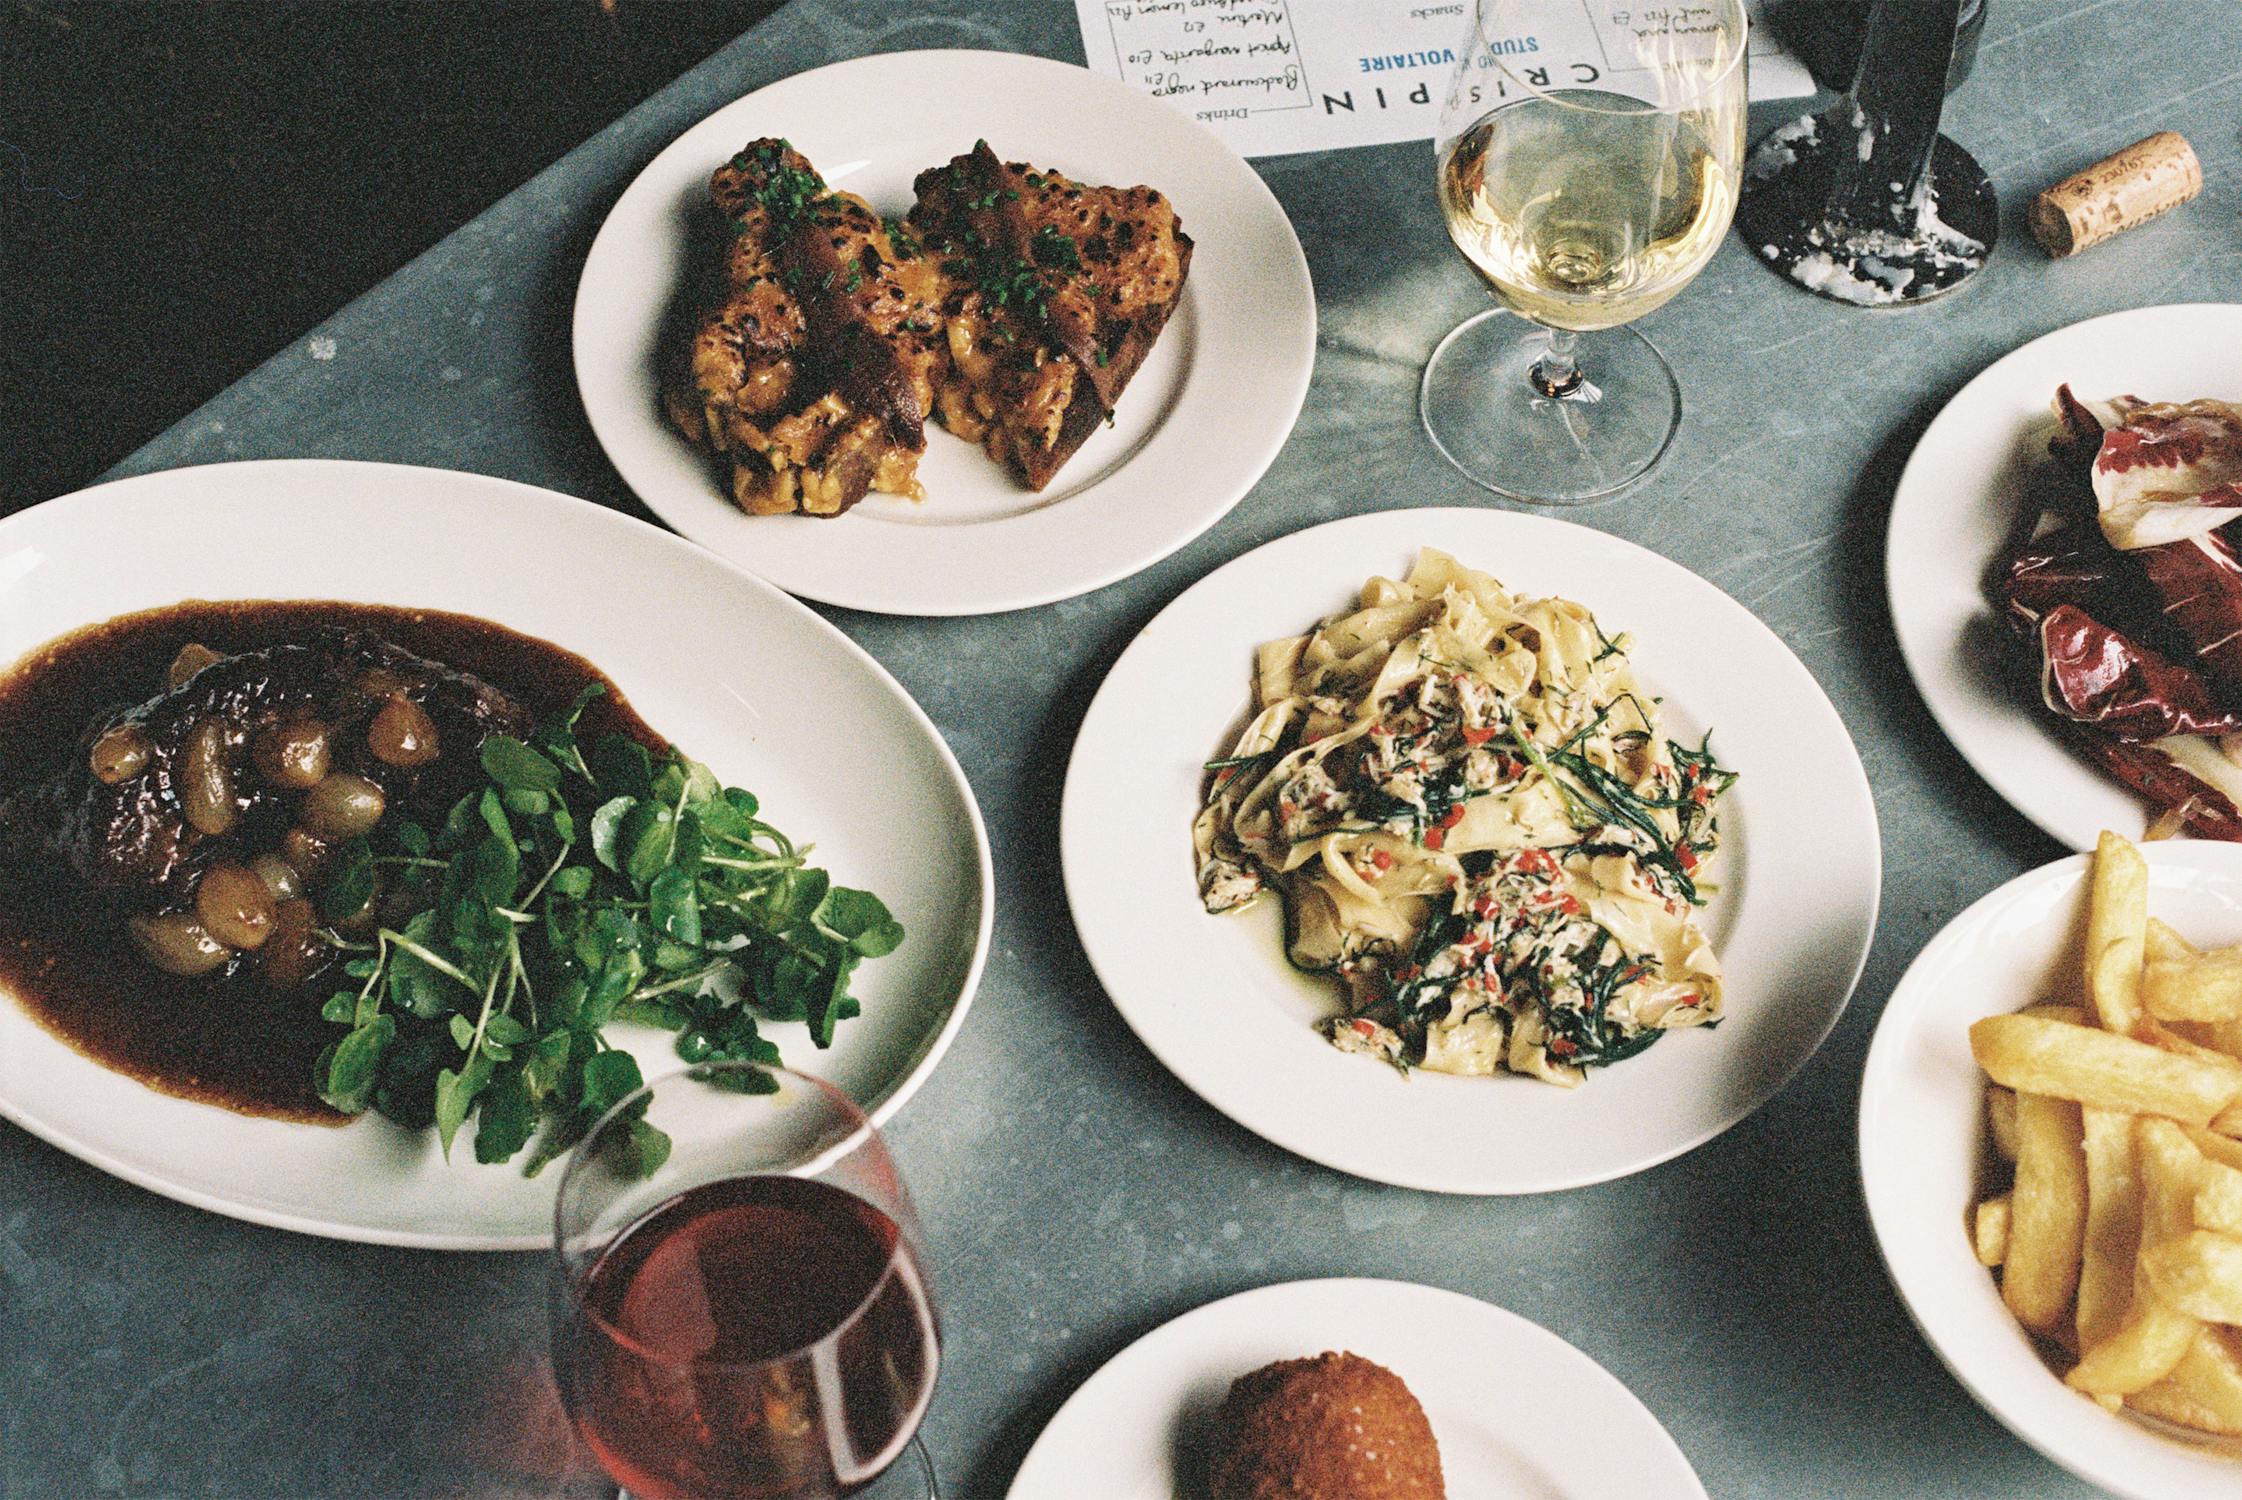 A photograph of a spread of freshly prepared restaurant food on white plates, including a creamy pasta dish, a joint of meat in gravy, a bowl of chips and glasses of red and white wine.